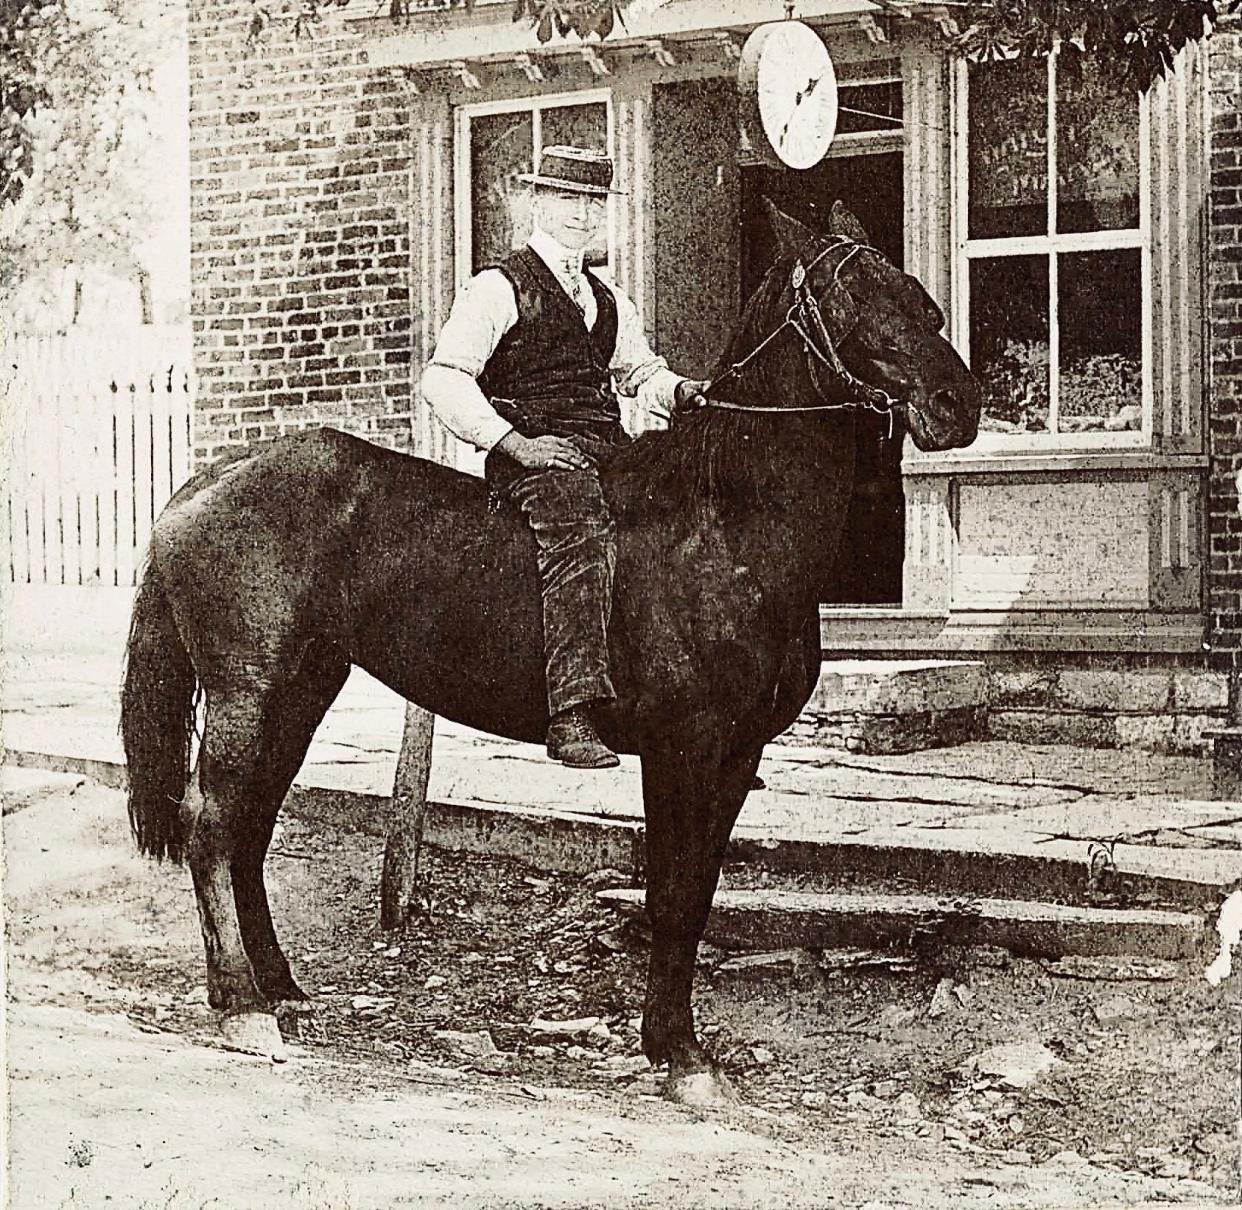 Keedysville man on horseback in front of E. E. Wyand's Clock Repair Shop, ca. late 19th century. Horses were essential; they pulled barges, fire engines, mail coaches, farm equipment and hearses.